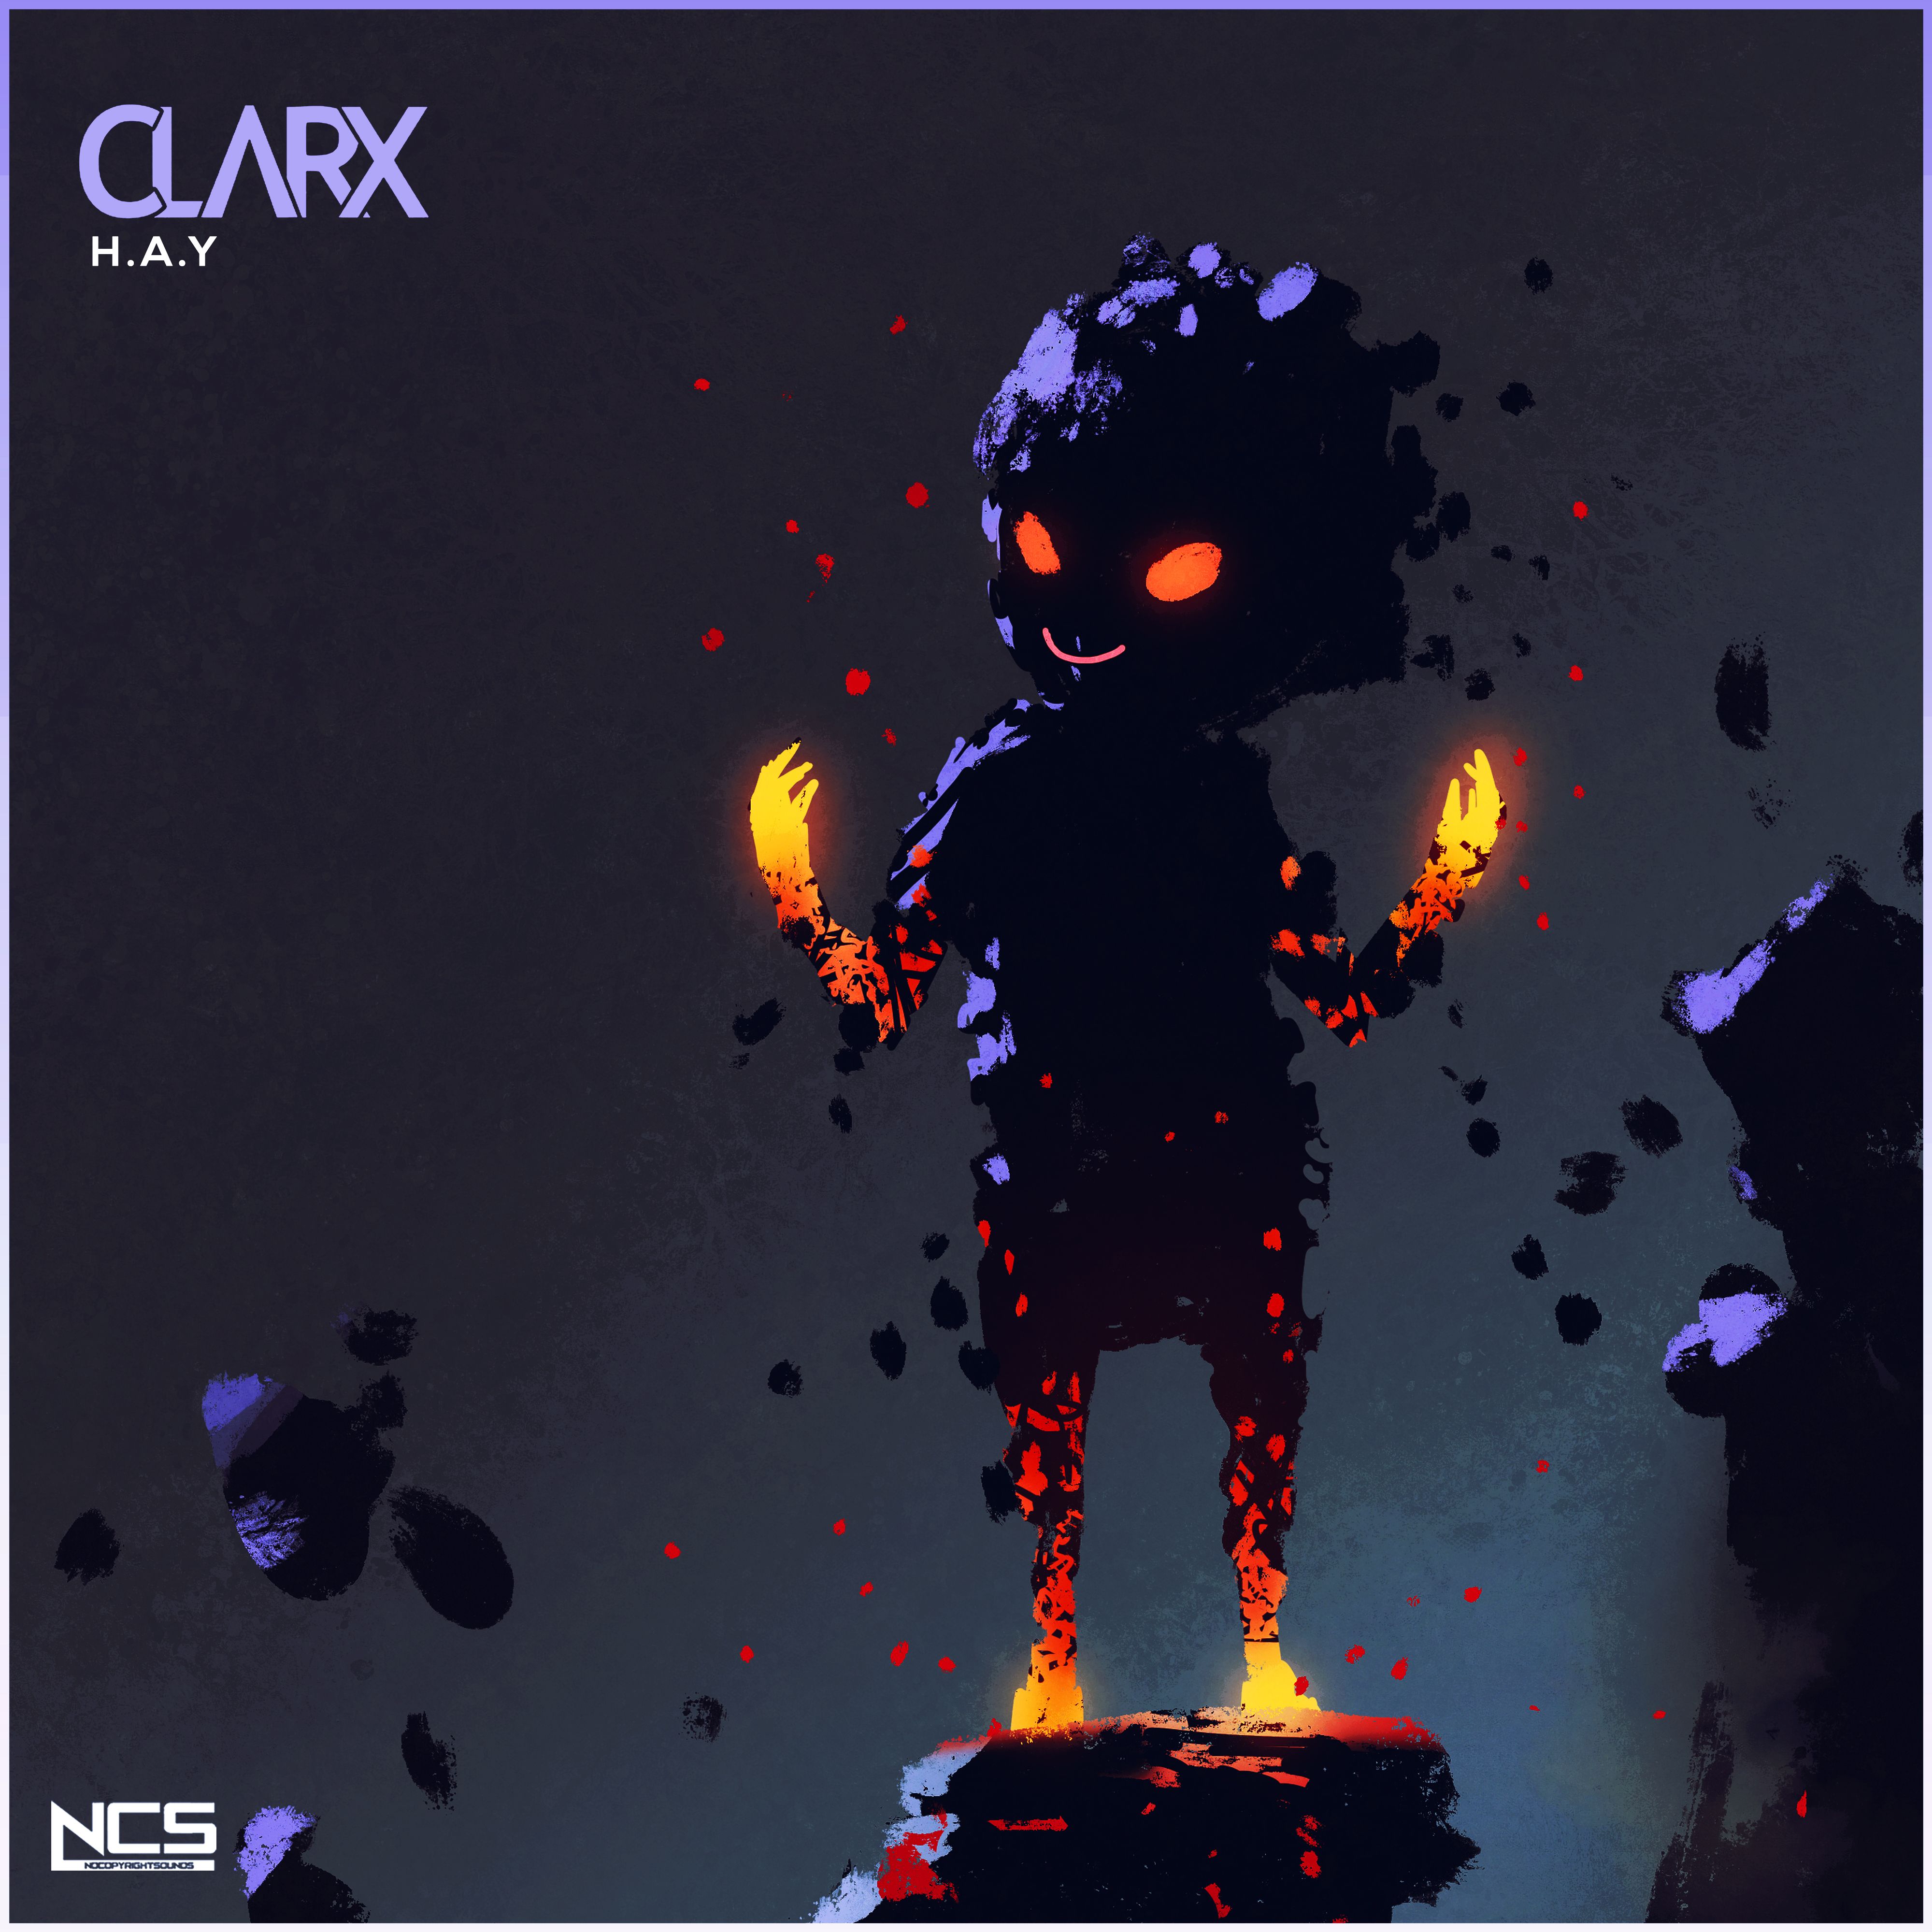 Download Clarx - H.A.Y [NCS Release]